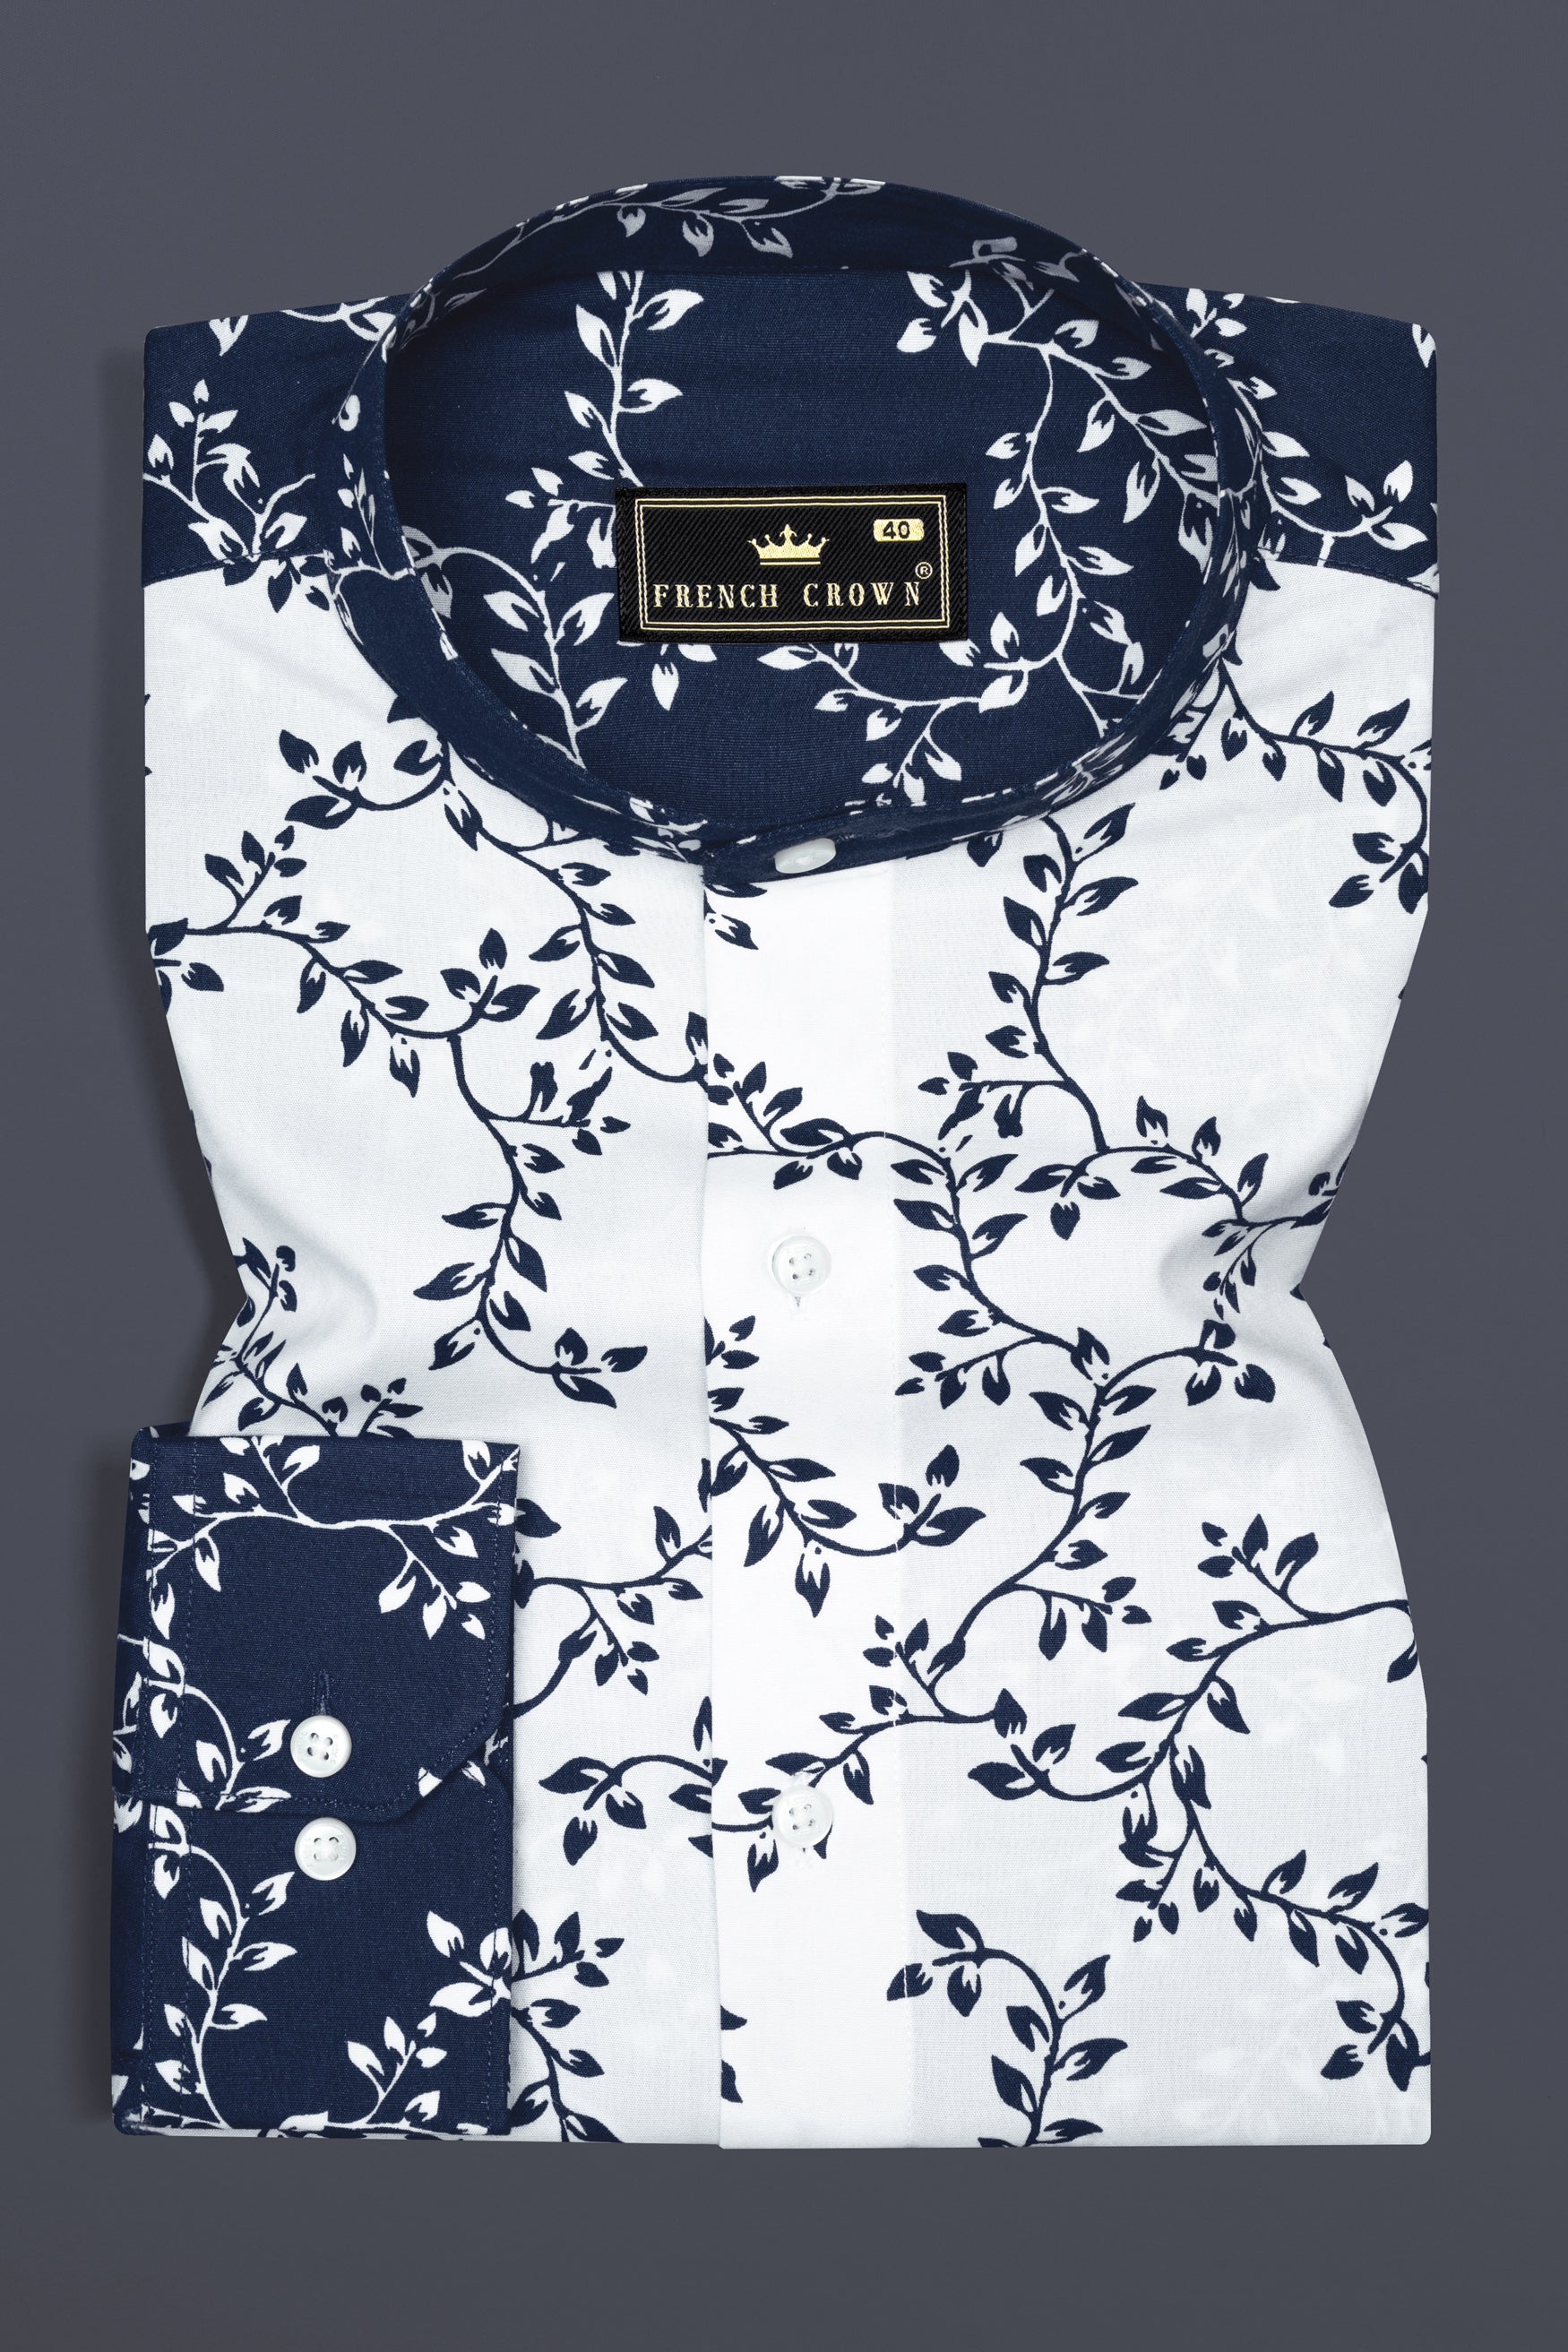 Bright White and Mirage Blue Leaves Printed Poplin Giza Cotton Shirt